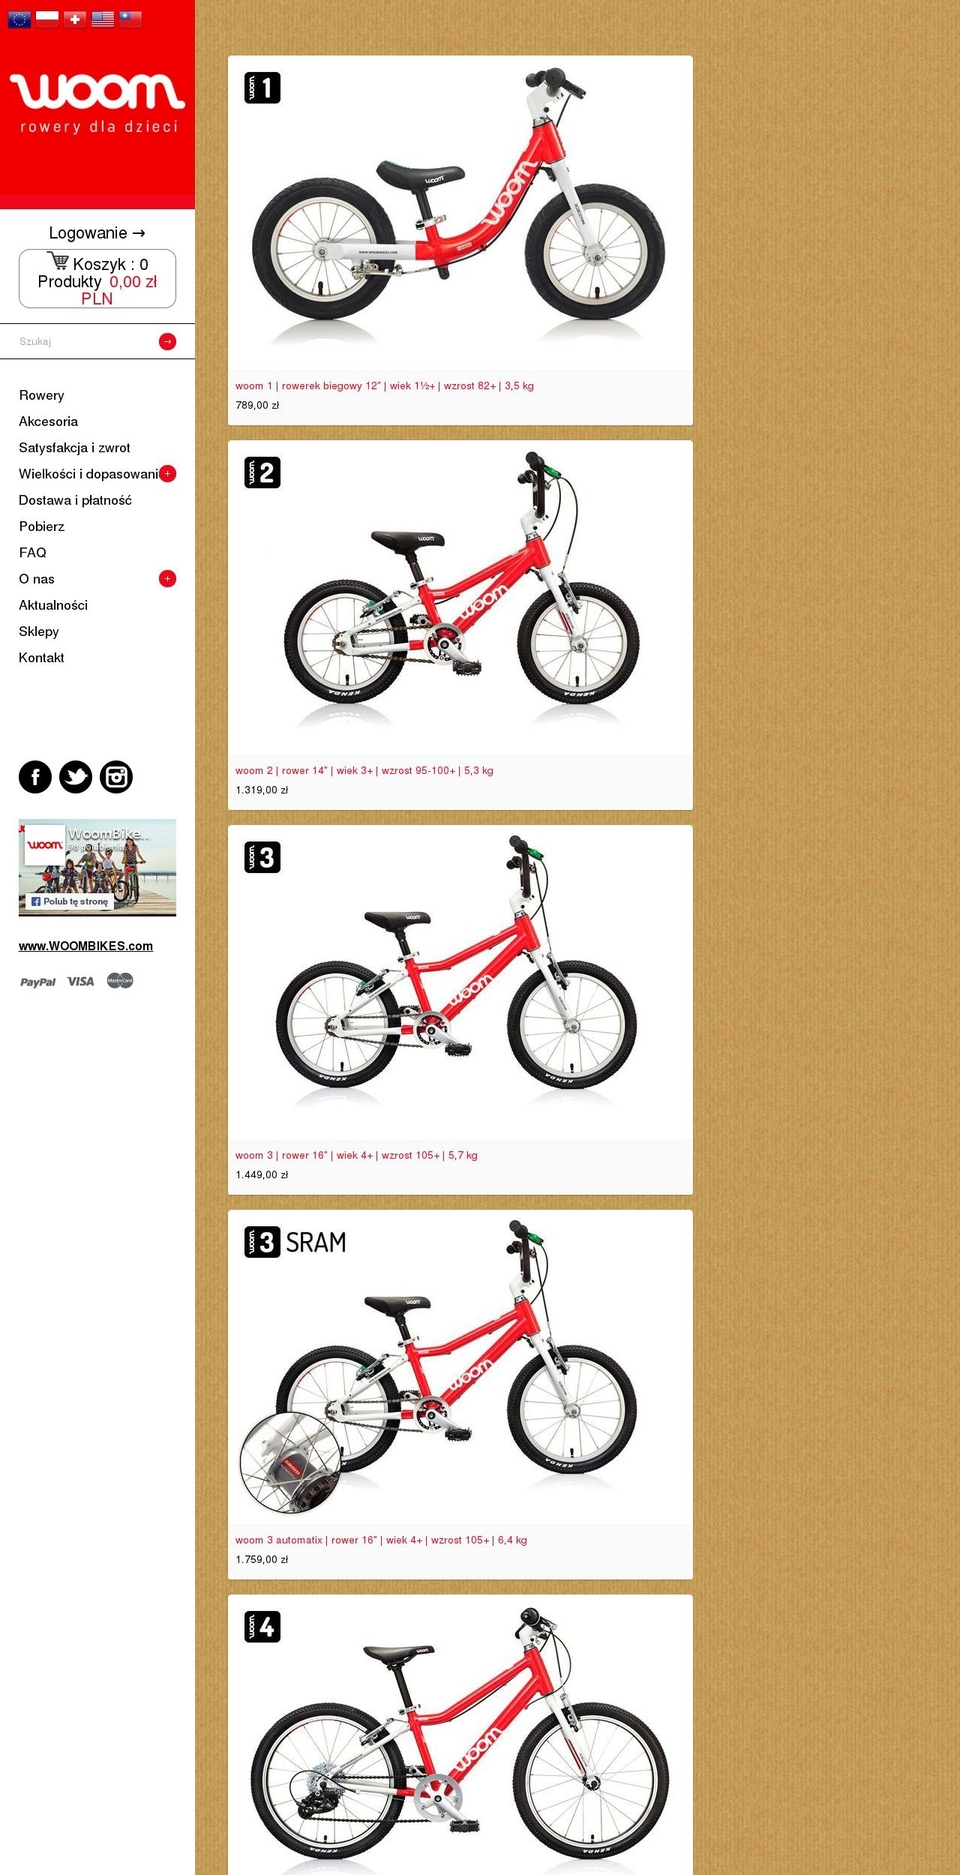 woombikes.pl shopify website screenshot